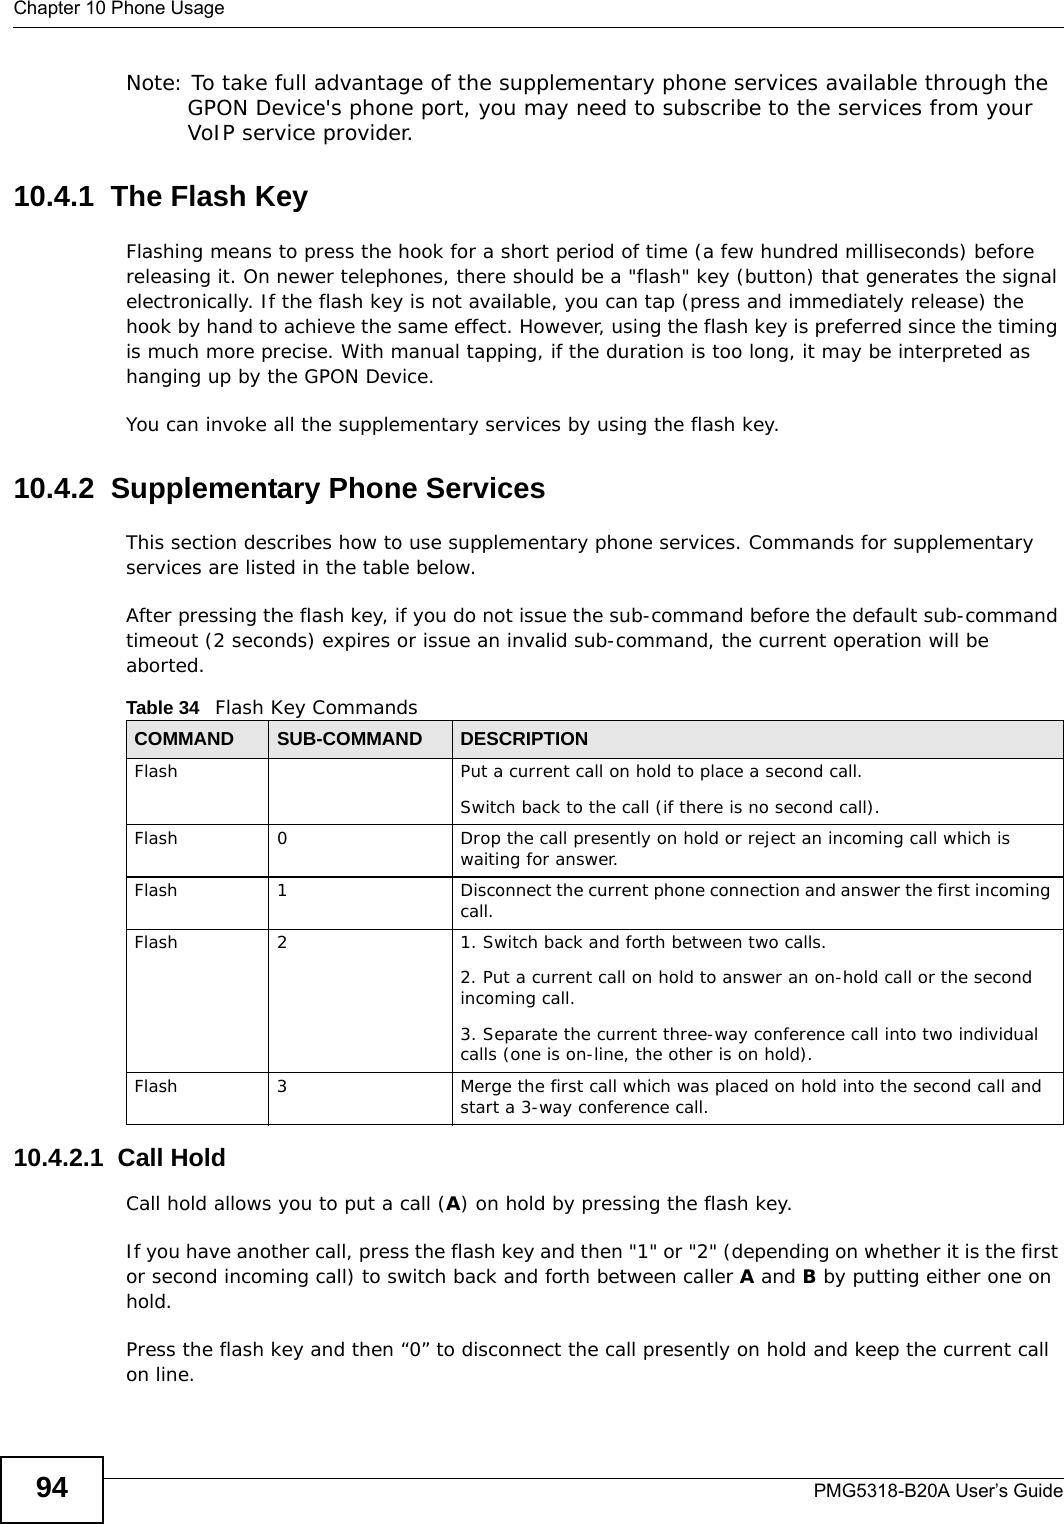 Chapter 10 Phone UsagePMG5318-B20A User’s Guide94Note: To take full advantage of the supplementary phone services available through the GPON Device&apos;s phone port, you may need to subscribe to the services from your VoIP service provider.10.4.1  The Flash KeyFlashing means to press the hook for a short period of time (a few hundred milliseconds) before releasing it. On newer telephones, there should be a &quot;flash&quot; key (button) that generates the signal electronically. If the flash key is not available, you can tap (press and immediately release) the hook by hand to achieve the same effect. However, using the flash key is preferred since the timing is much more precise. With manual tapping, if the duration is too long, it may be interpreted as hanging up by the GPON Device.You can invoke all the supplementary services by using the flash key. 10.4.2  Supplementary Phone ServicesThis section describes how to use supplementary phone services. Commands for supplementary services are listed in the table below.After pressing the flash key, if you do not issue the sub-command before the default sub-command timeout (2 seconds) expires or issue an invalid sub-command, the current operation will be aborted.10.4.2.1  Call HoldCall hold allows you to put a call (A) on hold by pressing the flash key. If you have another call, press the flash key and then &quot;1&quot; or &quot;2&quot; (depending on whether it is the first or second incoming call) to switch back and forth between caller A and B by putting either one on hold.Press the flash key and then “0” to disconnect the call presently on hold and keep the current call on line.Table 34   Flash Key CommandsCOMMAND SUB-COMMAND DESCRIPTIONFlash  Put a current call on hold to place a second call.Switch back to the call (if there is no second call).Flash 0 Drop the call presently on hold or reject an incoming call which is waiting for answer.Flash 1 Disconnect the current phone connection and answer the first incoming call.Flash 2 1. Switch back and forth between two calls.2. Put a current call on hold to answer an on-hold call or the second incoming call.3. Separate the current three-way conference call into two individual calls (one is on-line, the other is on hold).Flash 3 Merge the first call which was placed on hold into the second call and start a 3-way conference call.